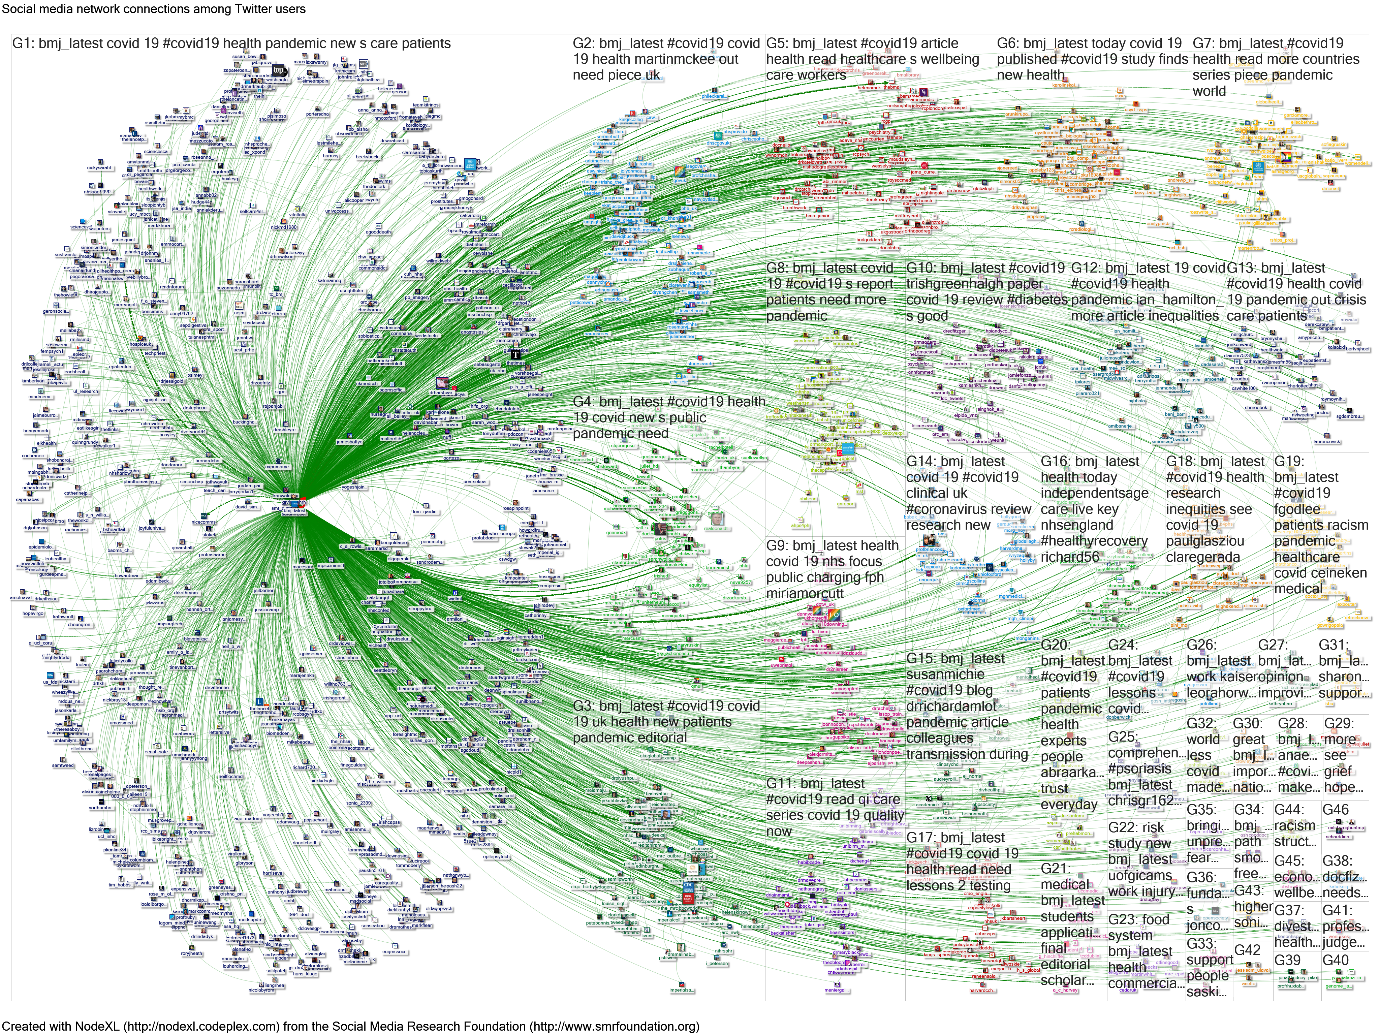 Figure 2. The @BMJ_Latest network reconstructed from tweet and retweet IDs (16 March to 20 June 2020). Source NodeXL.